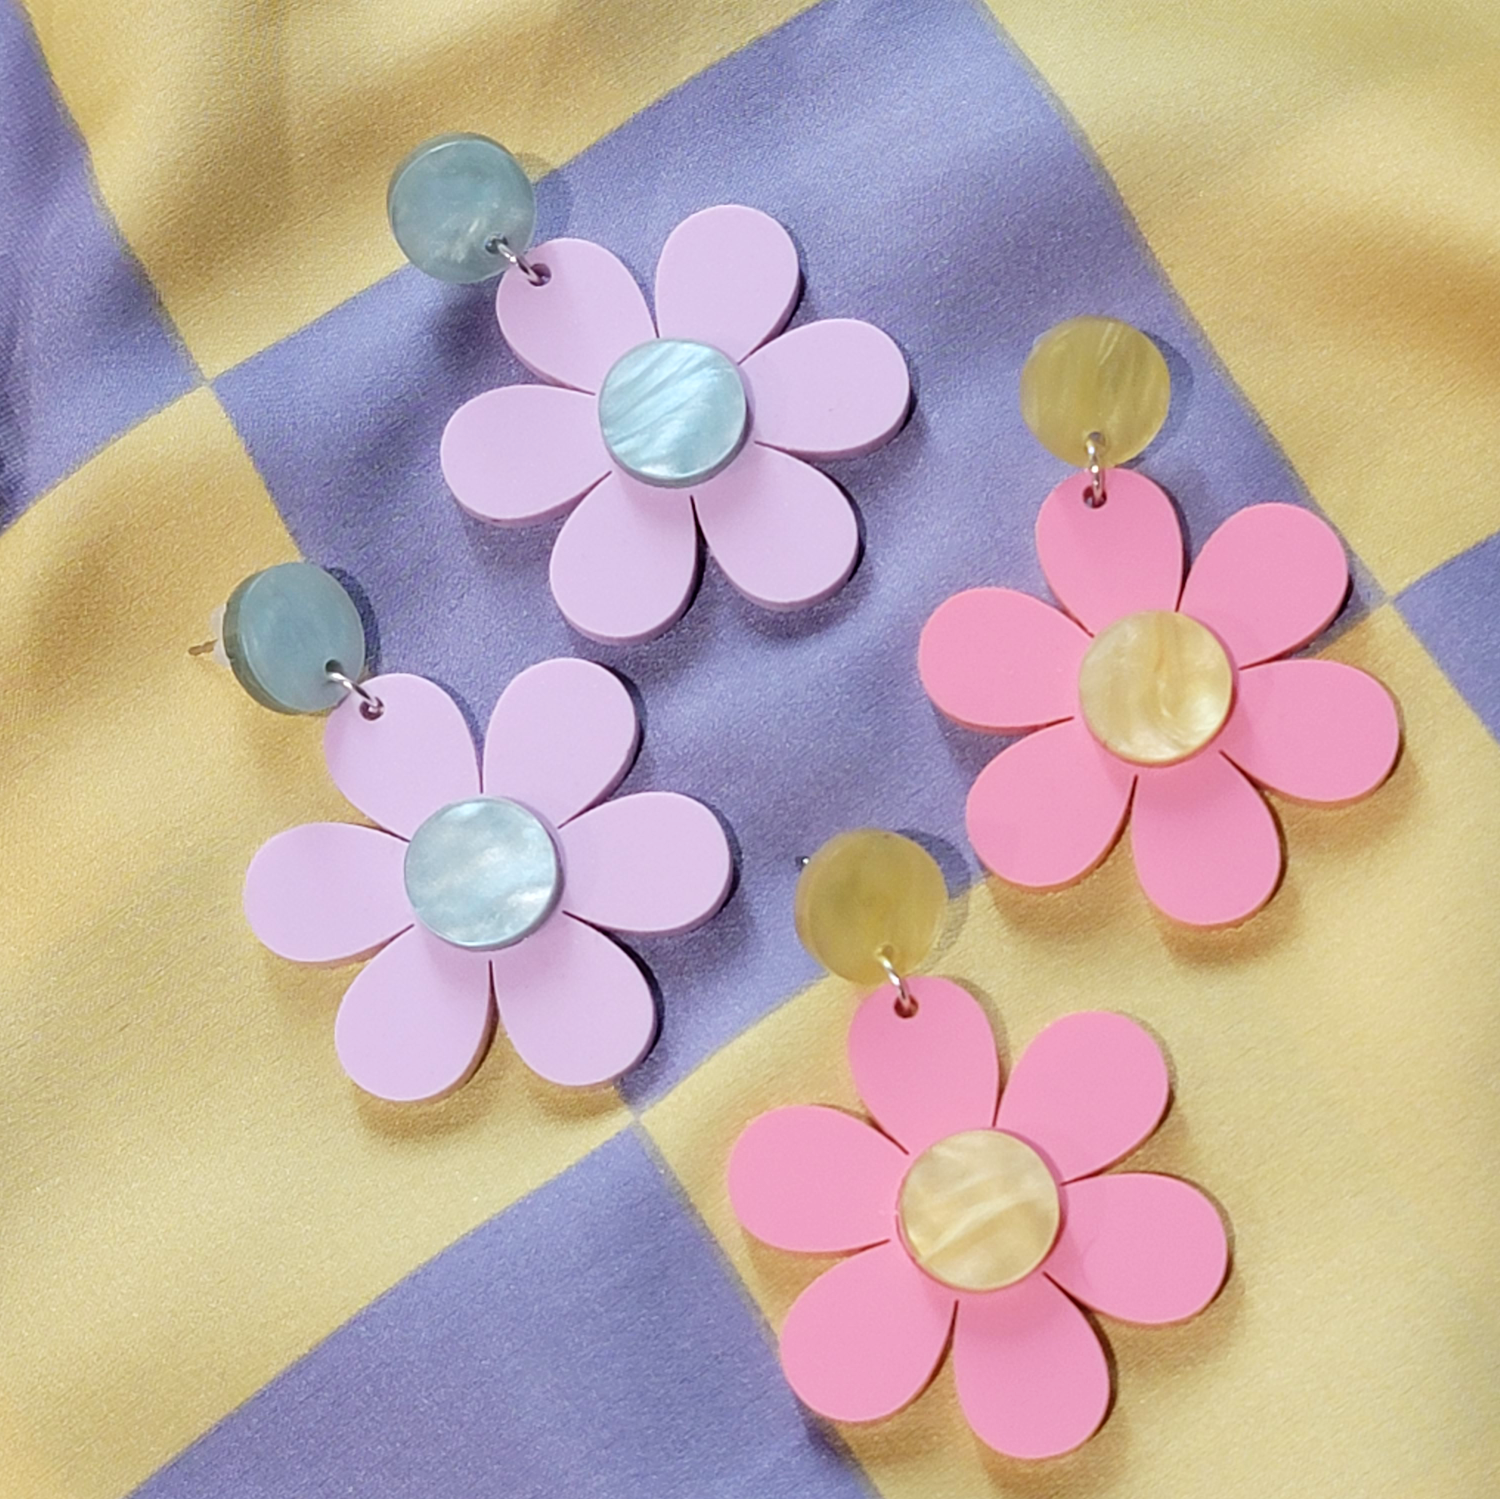 Summer Daisies Earrings by Victoria Essie Studios at stupidkitsch.com